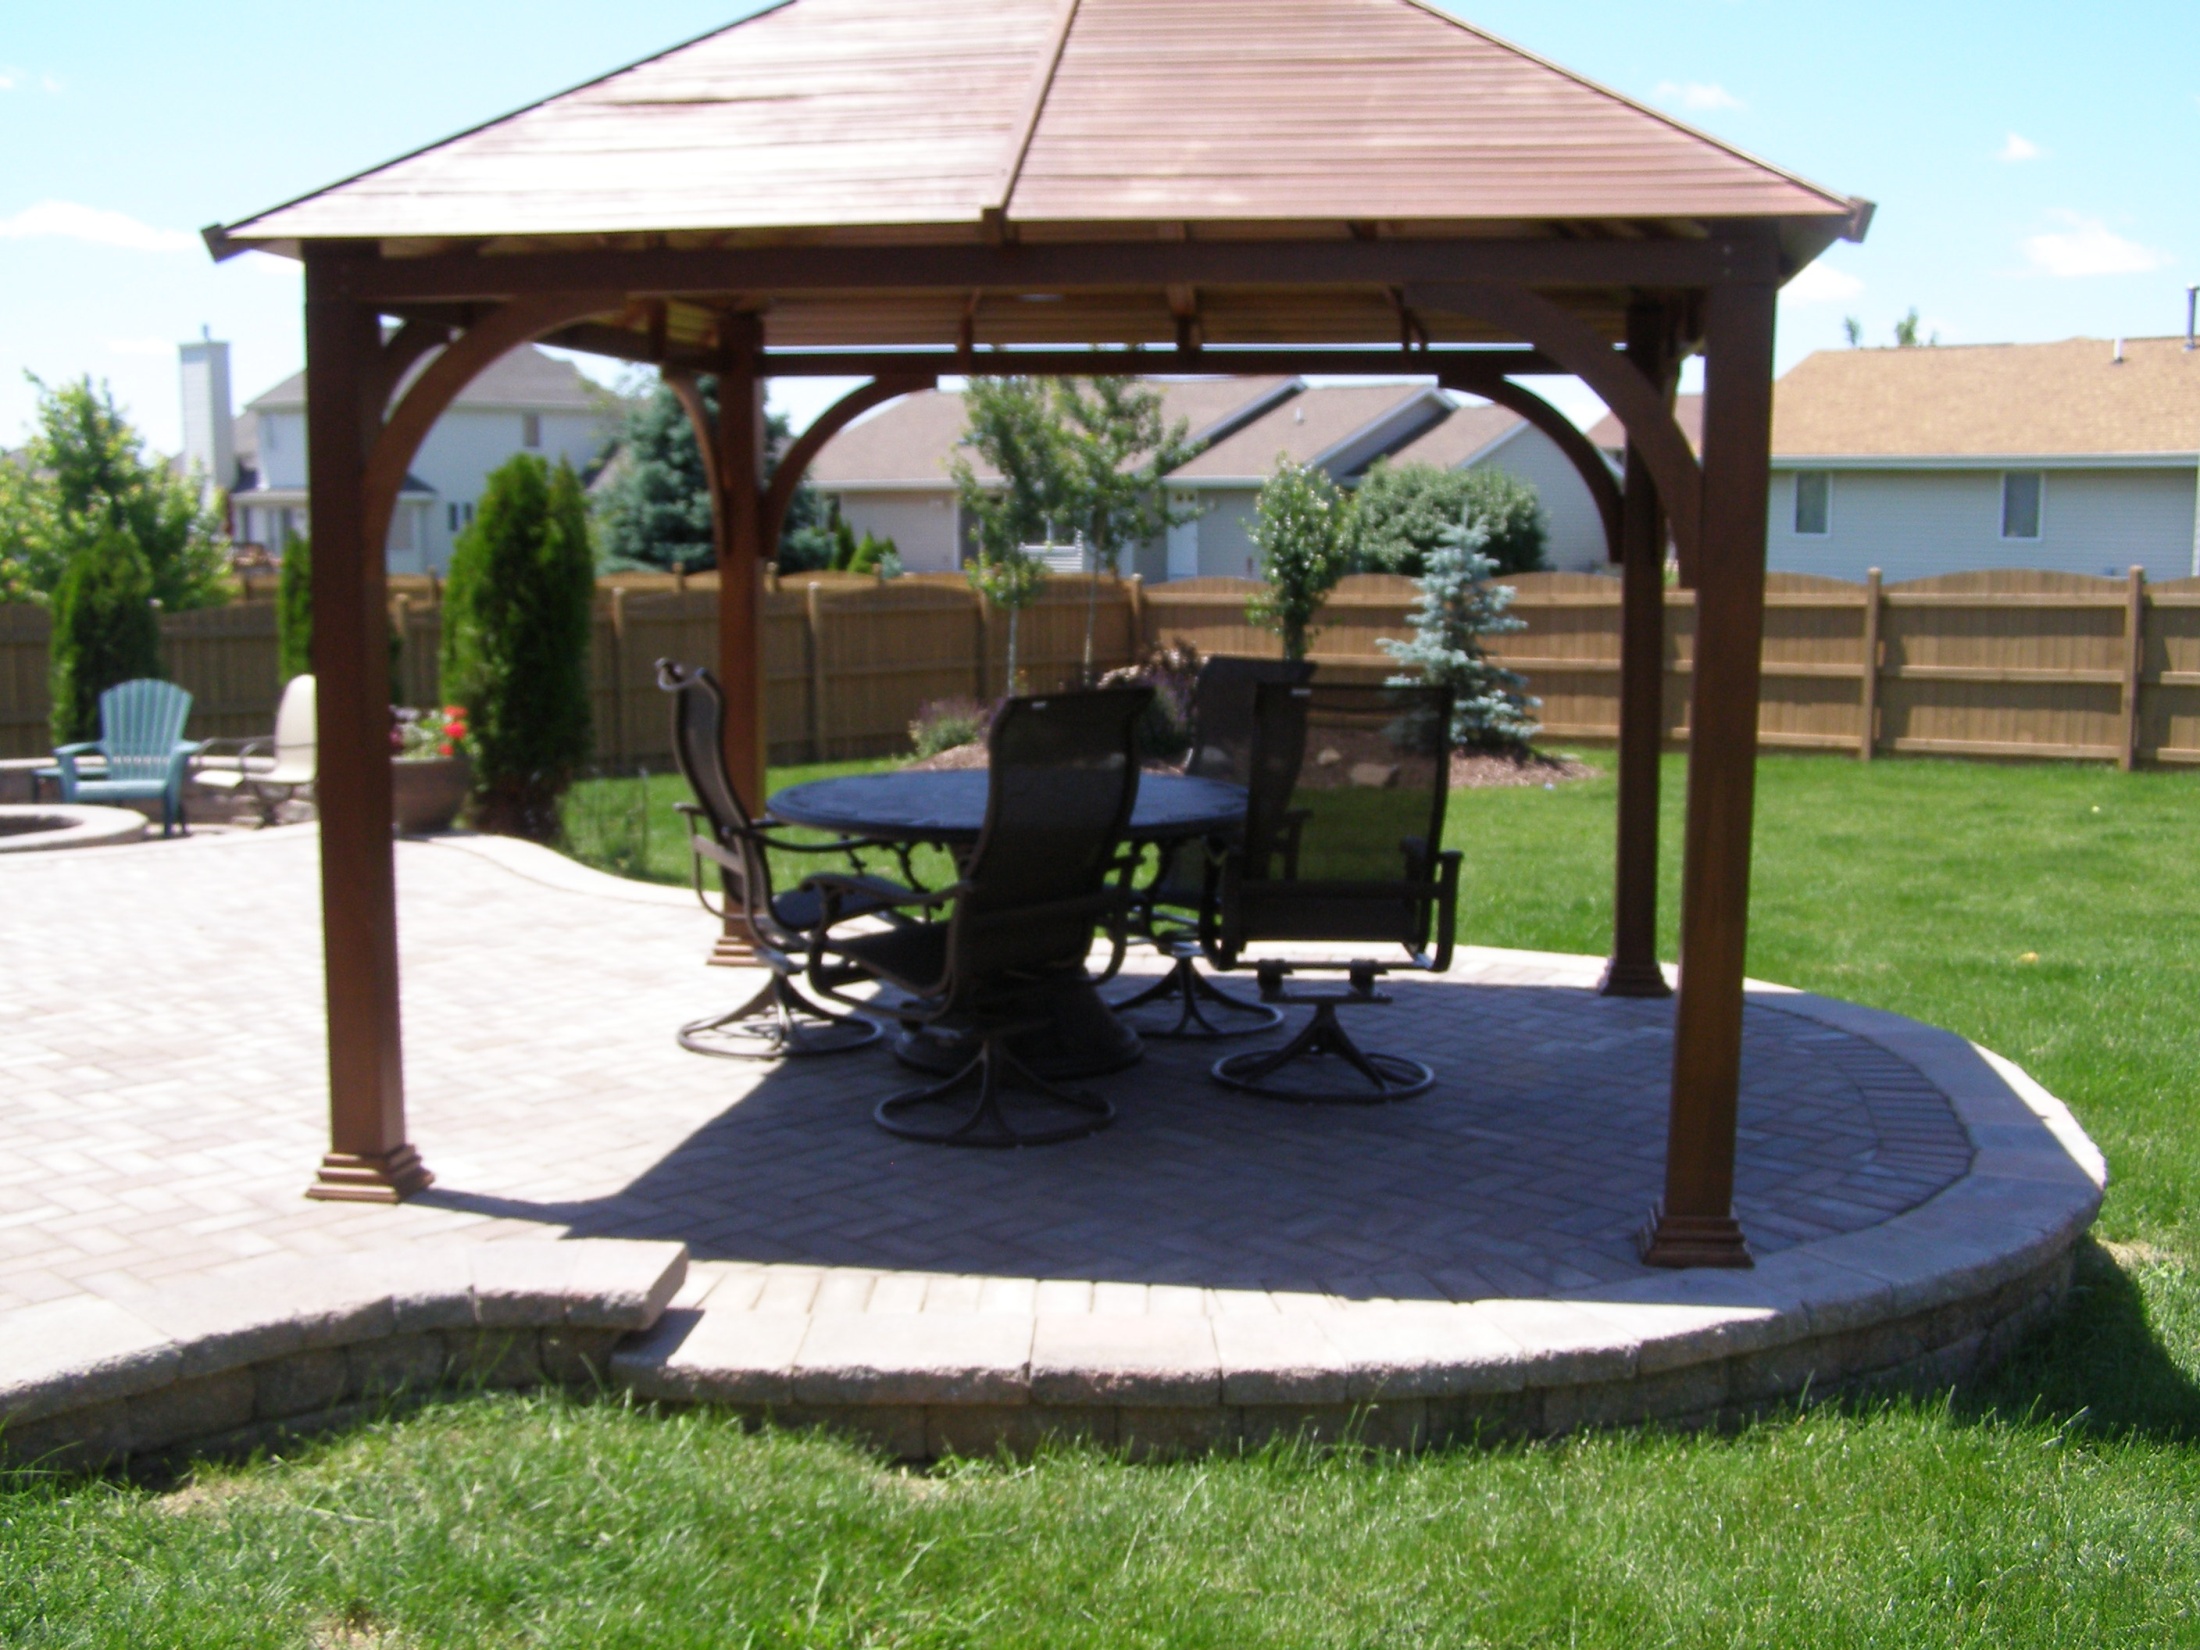 our landscape services include building gazebos and shade structures